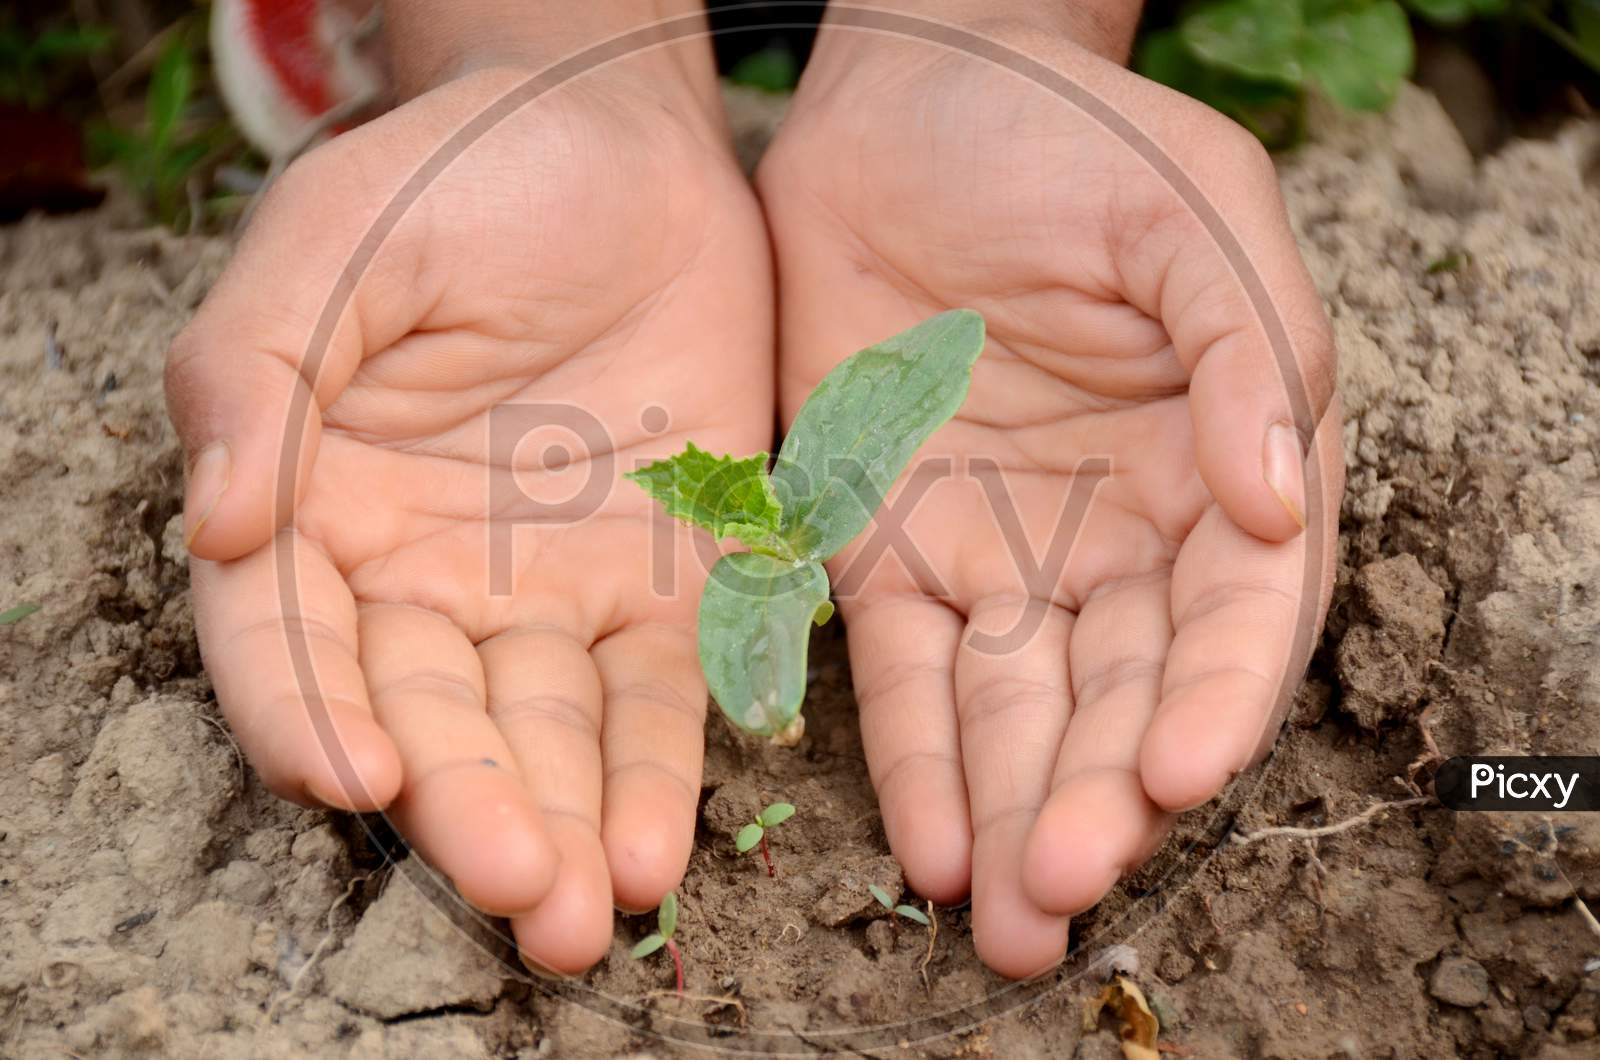 Round Gourd Plant Soil Heap In Hands Over Out Of Focus Brown Background.